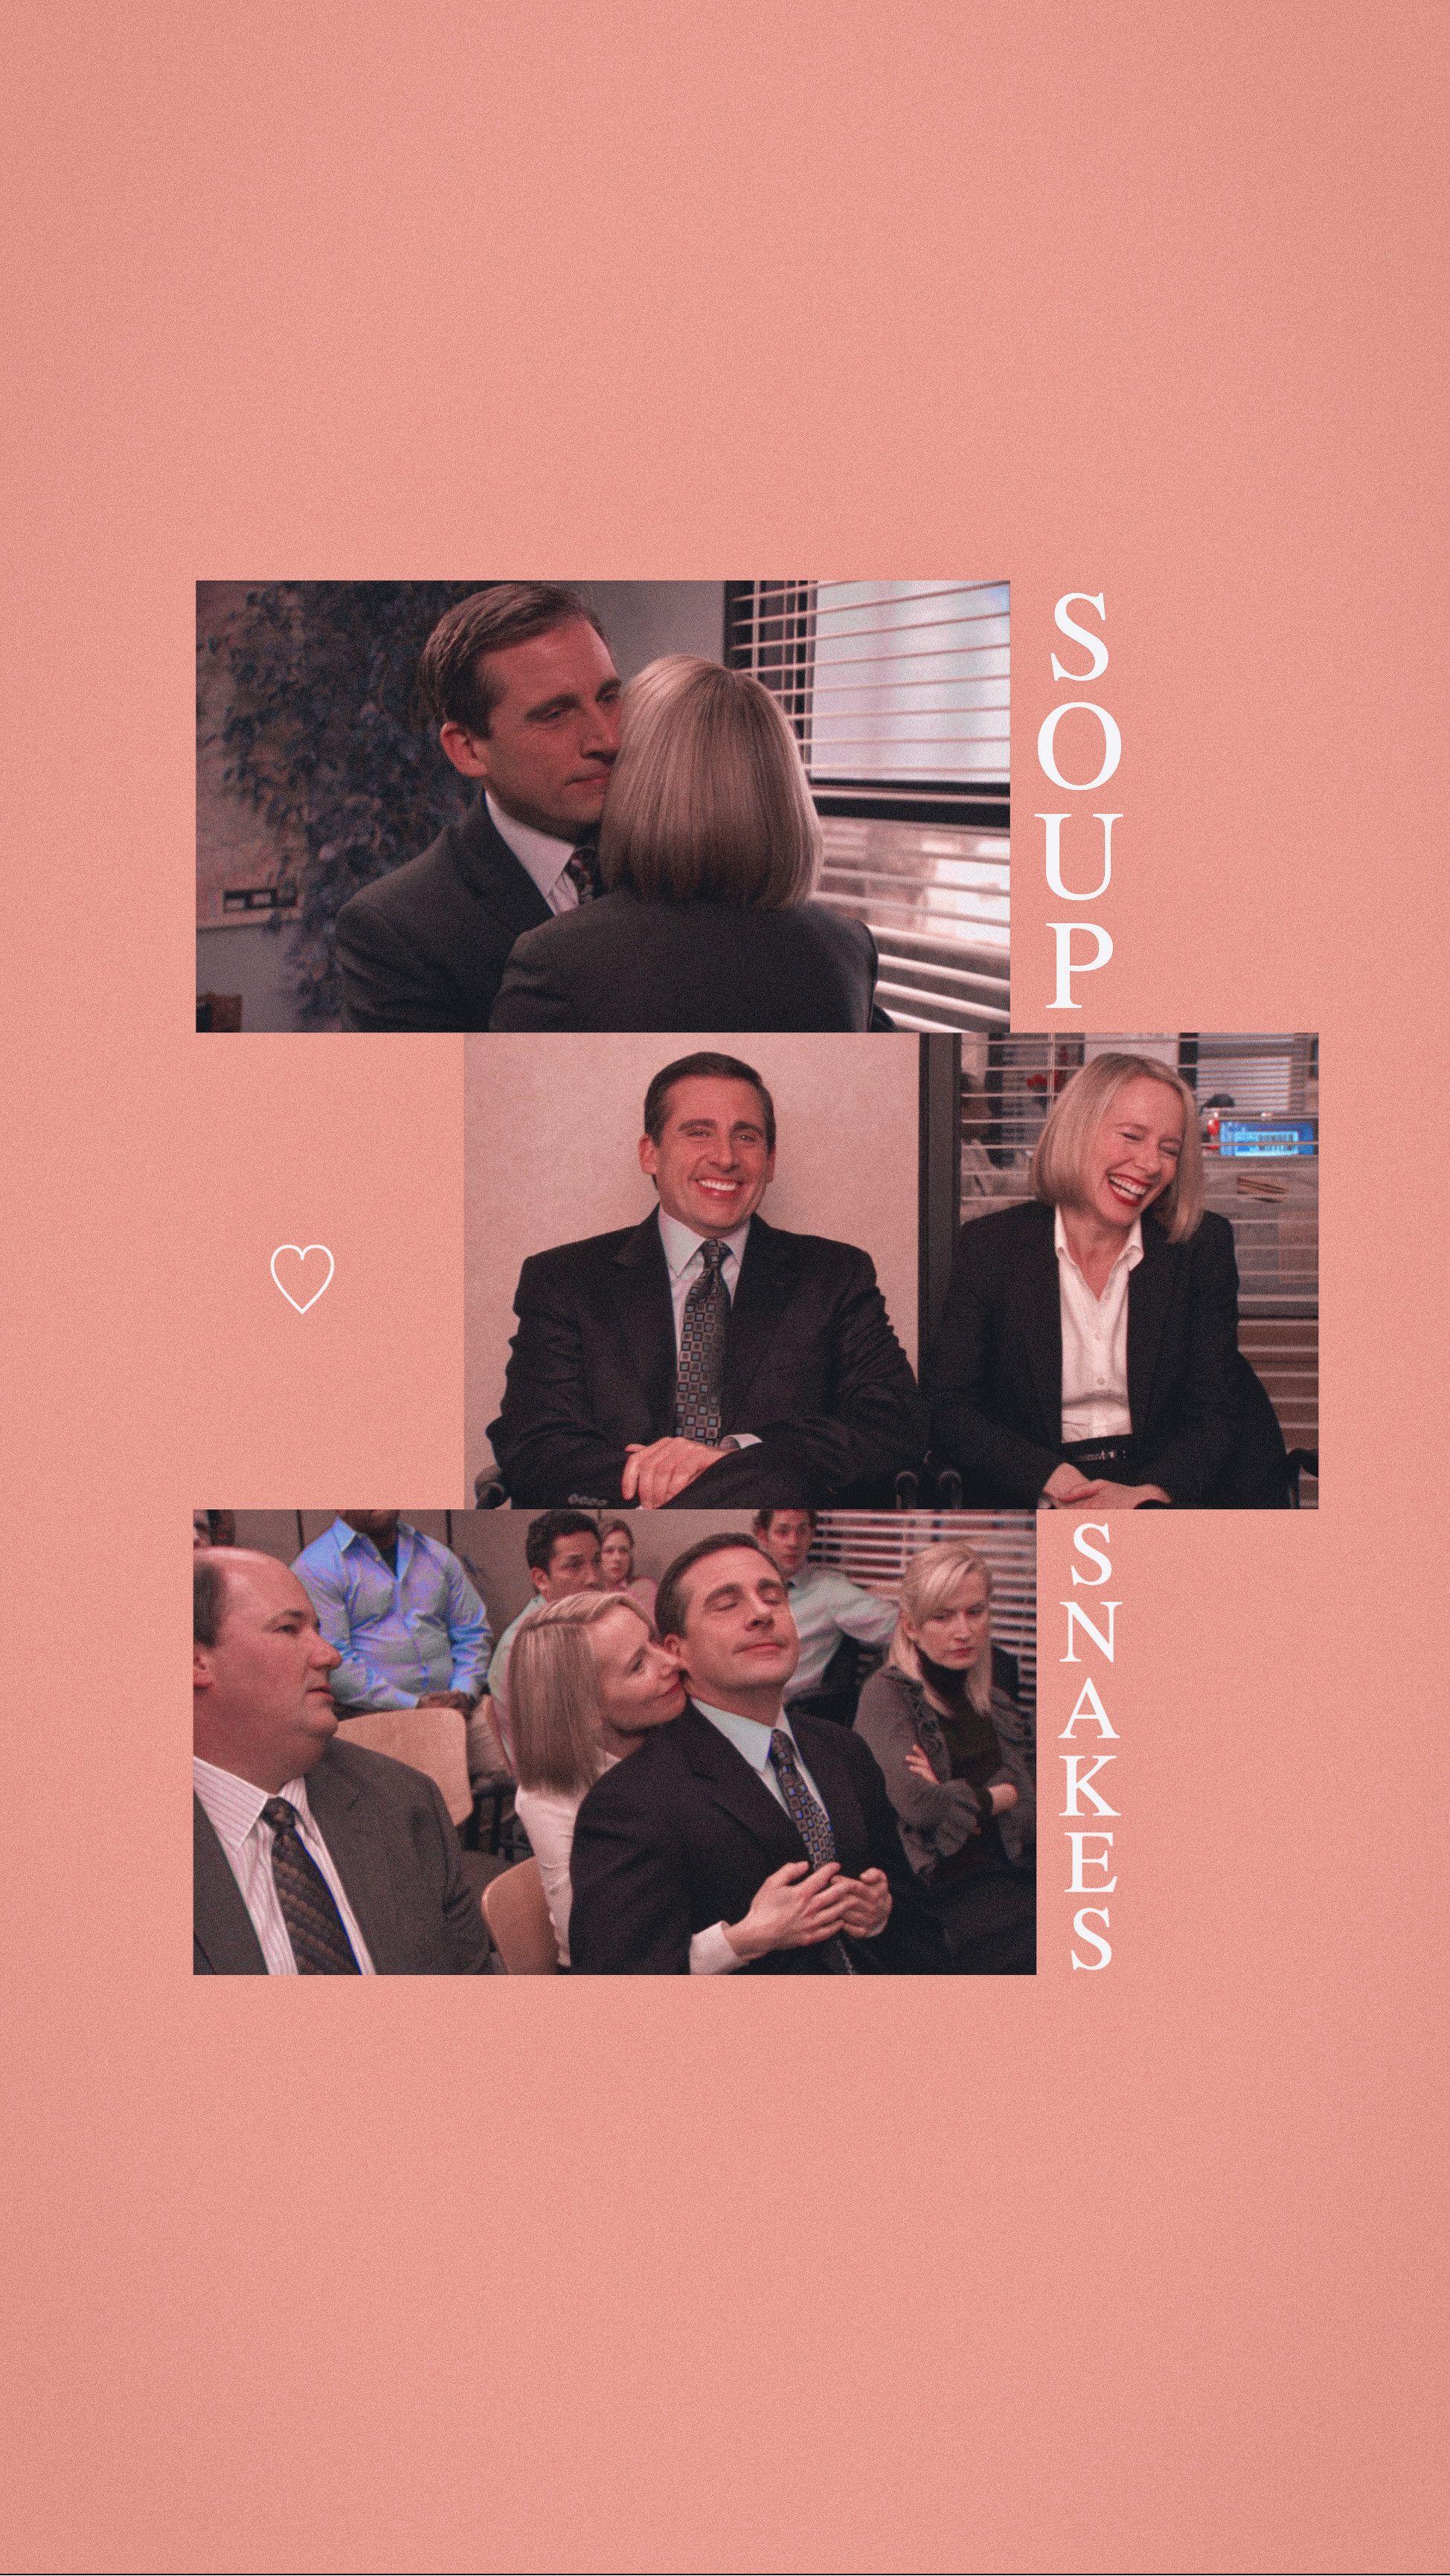 The Office Show Aesthetic